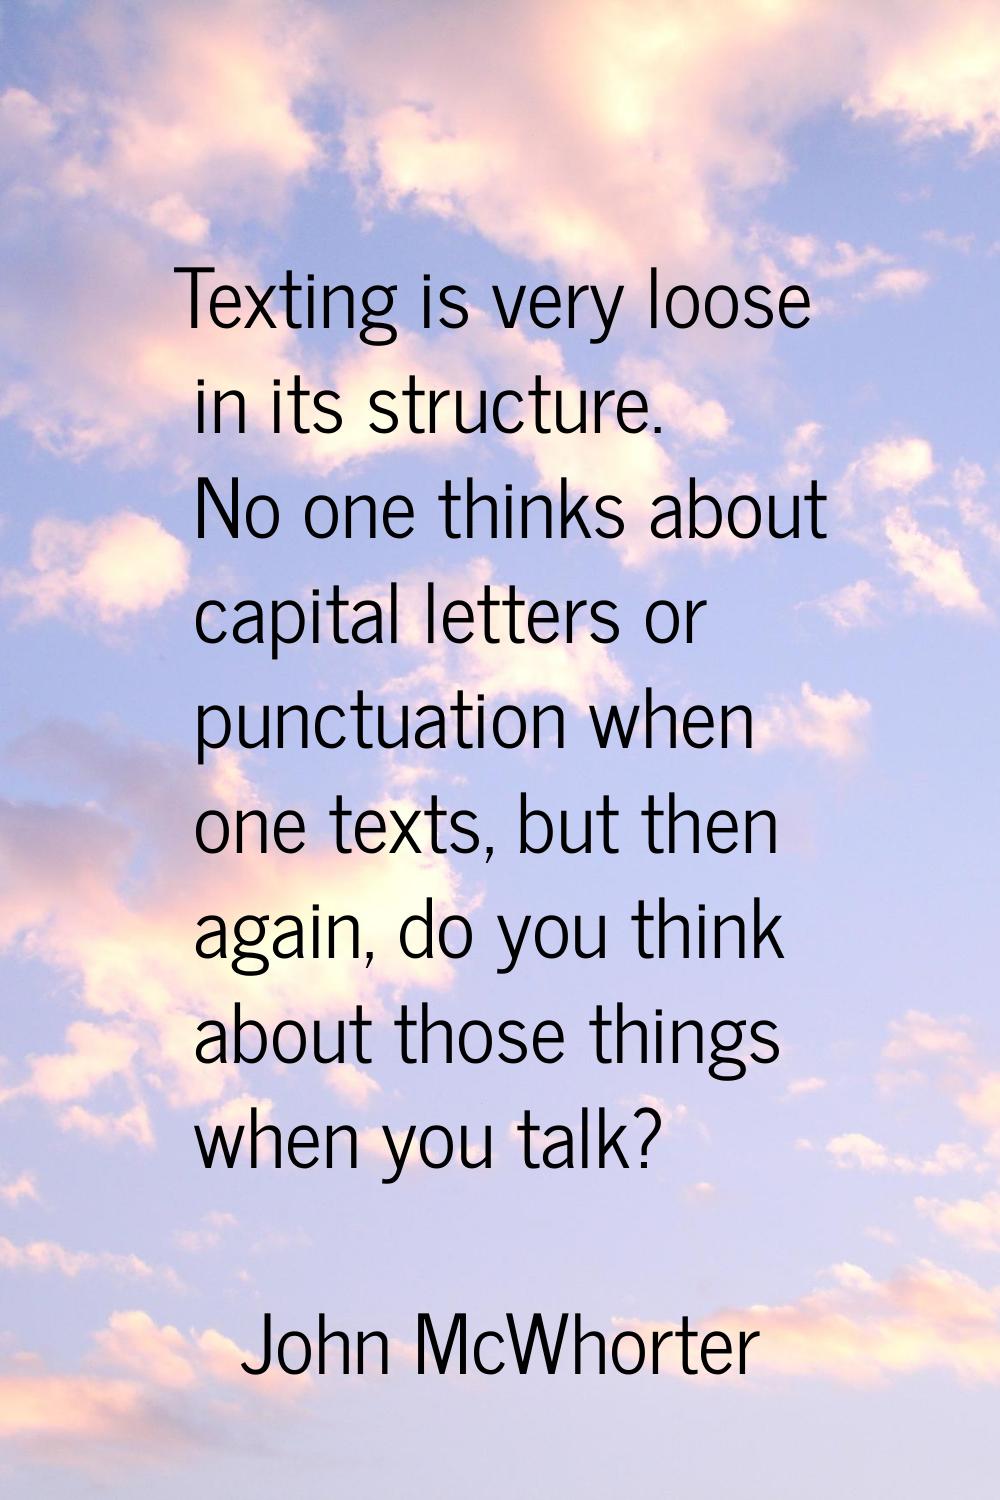 Texting is very loose in its structure. No one thinks about capital letters or punctuation when one